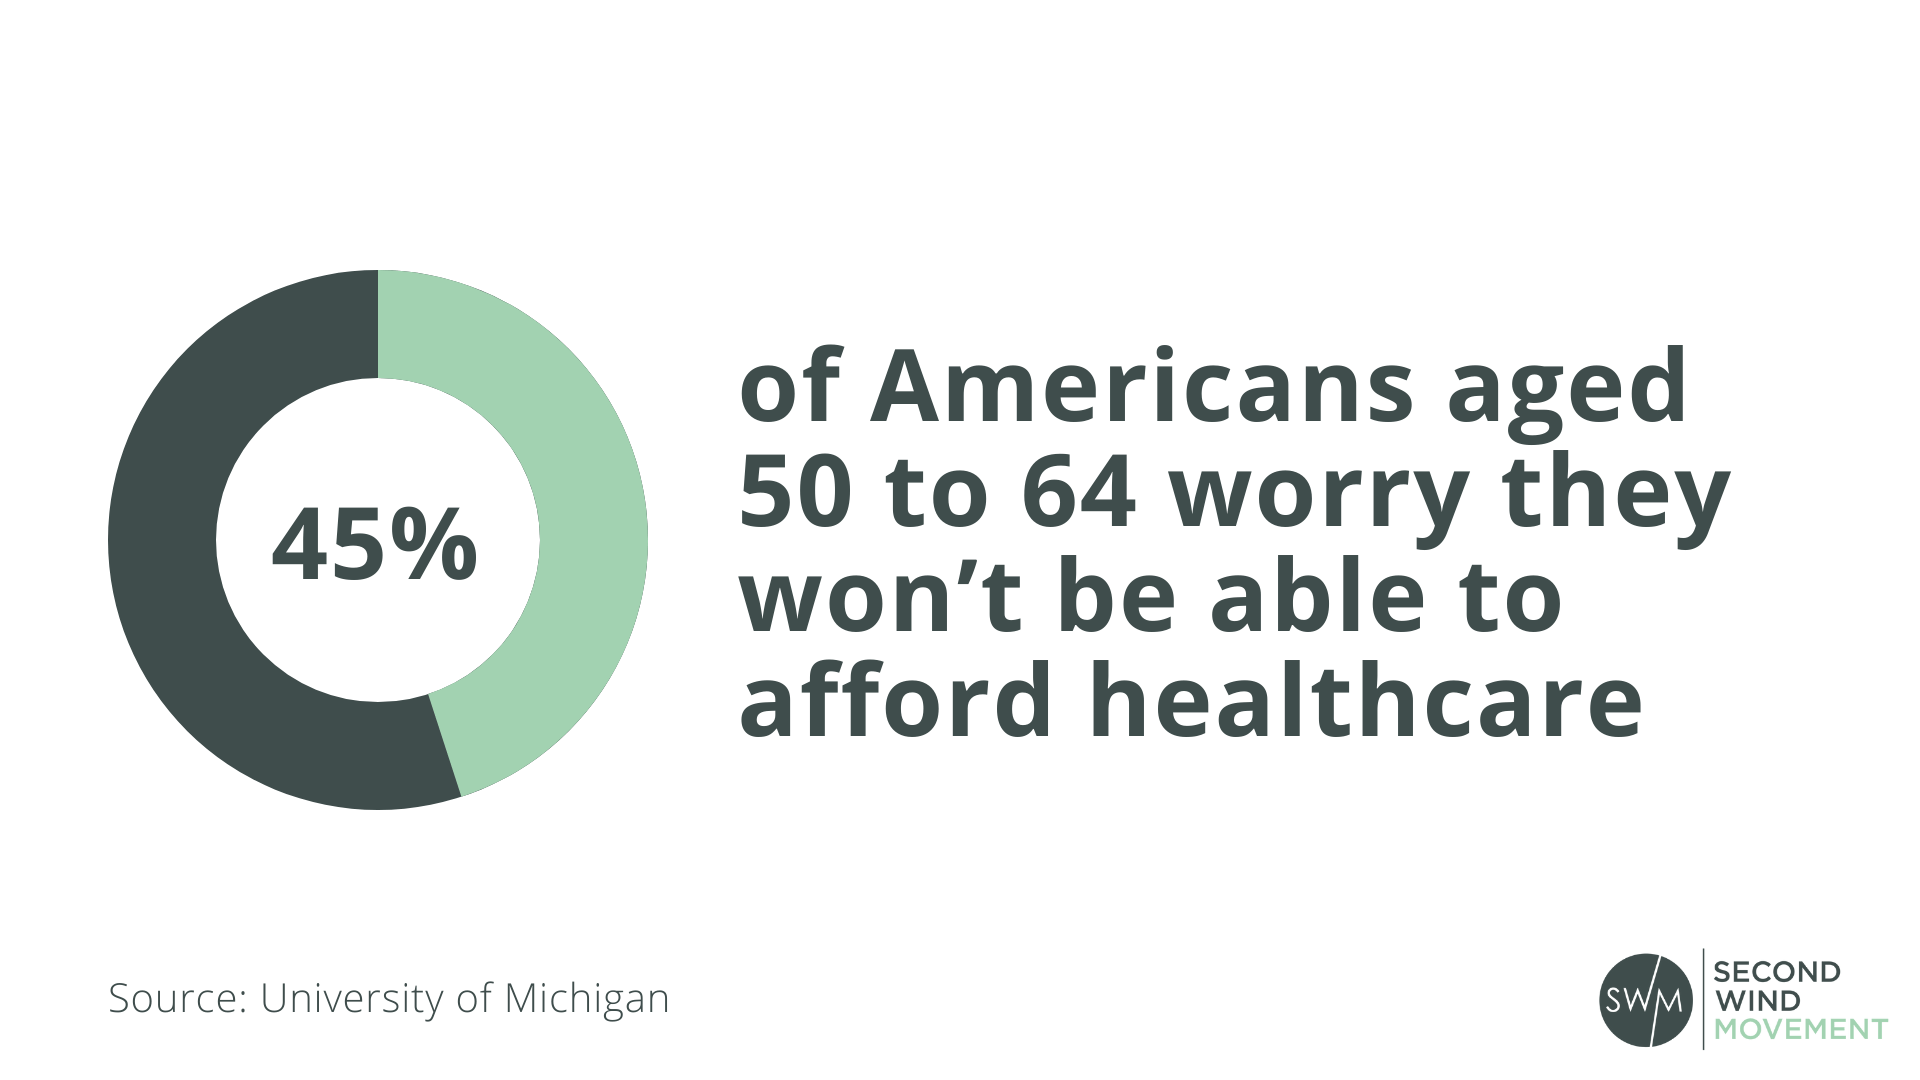 45% of Americans aged 50 to 64 worry that they won't be able to afford healthcare